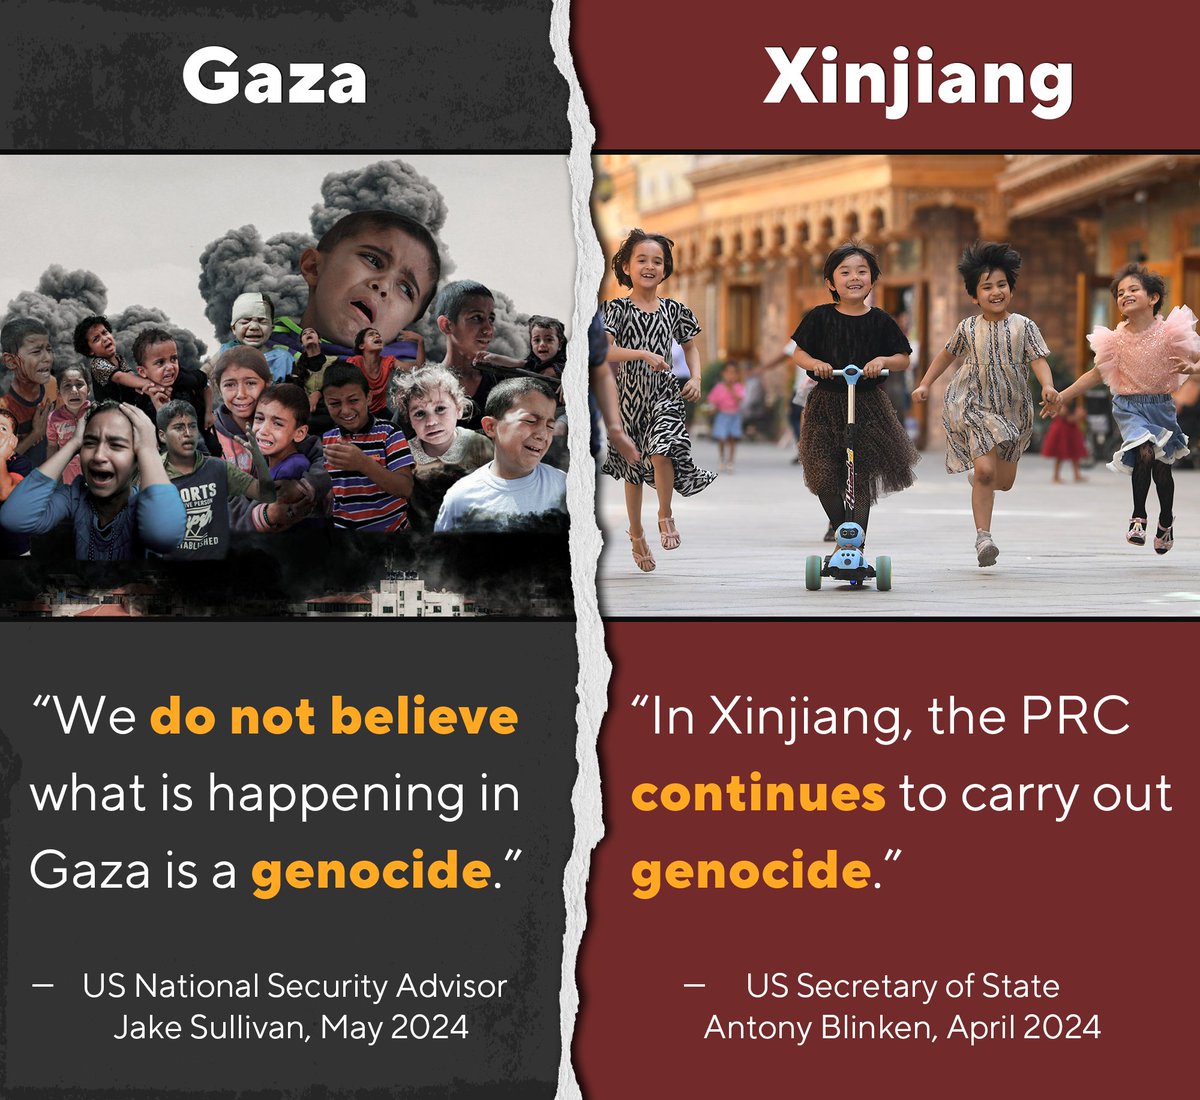 There's a Genocide in Gaza, NOT Xinjiang.